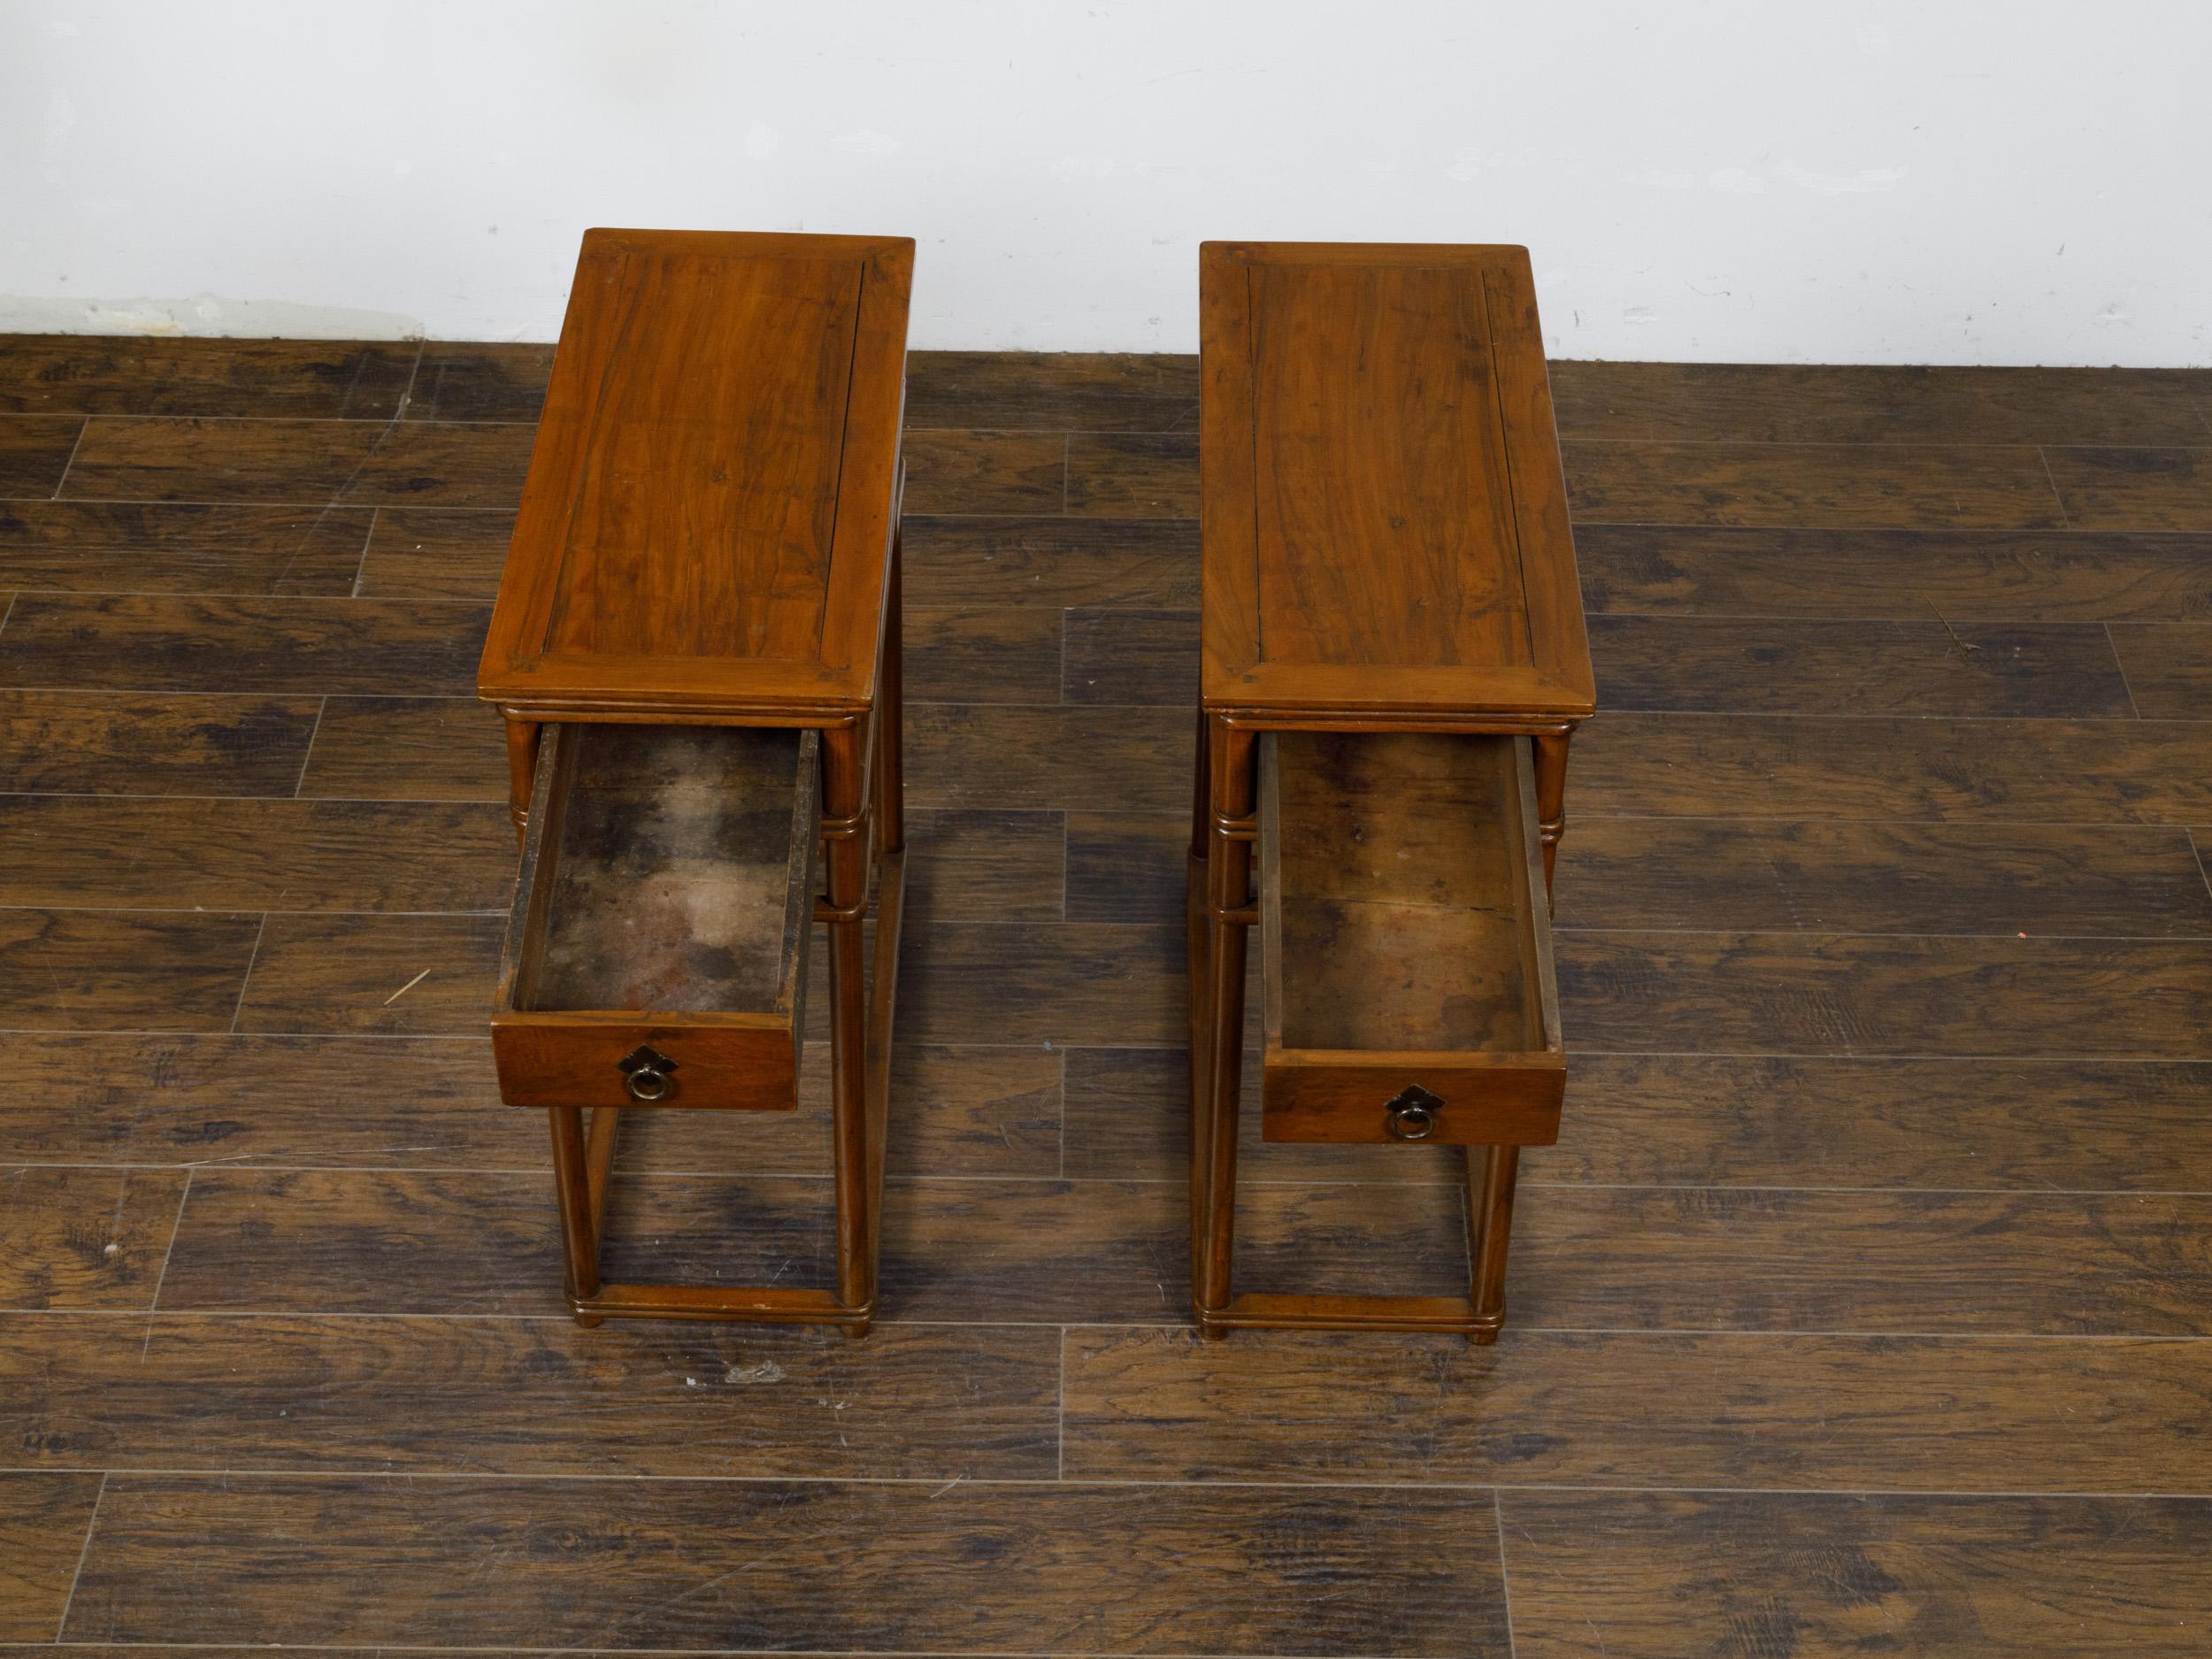 Pair of Teak 19th Century Console Tables with Drawers and Humpback Stretchers For Sale 2